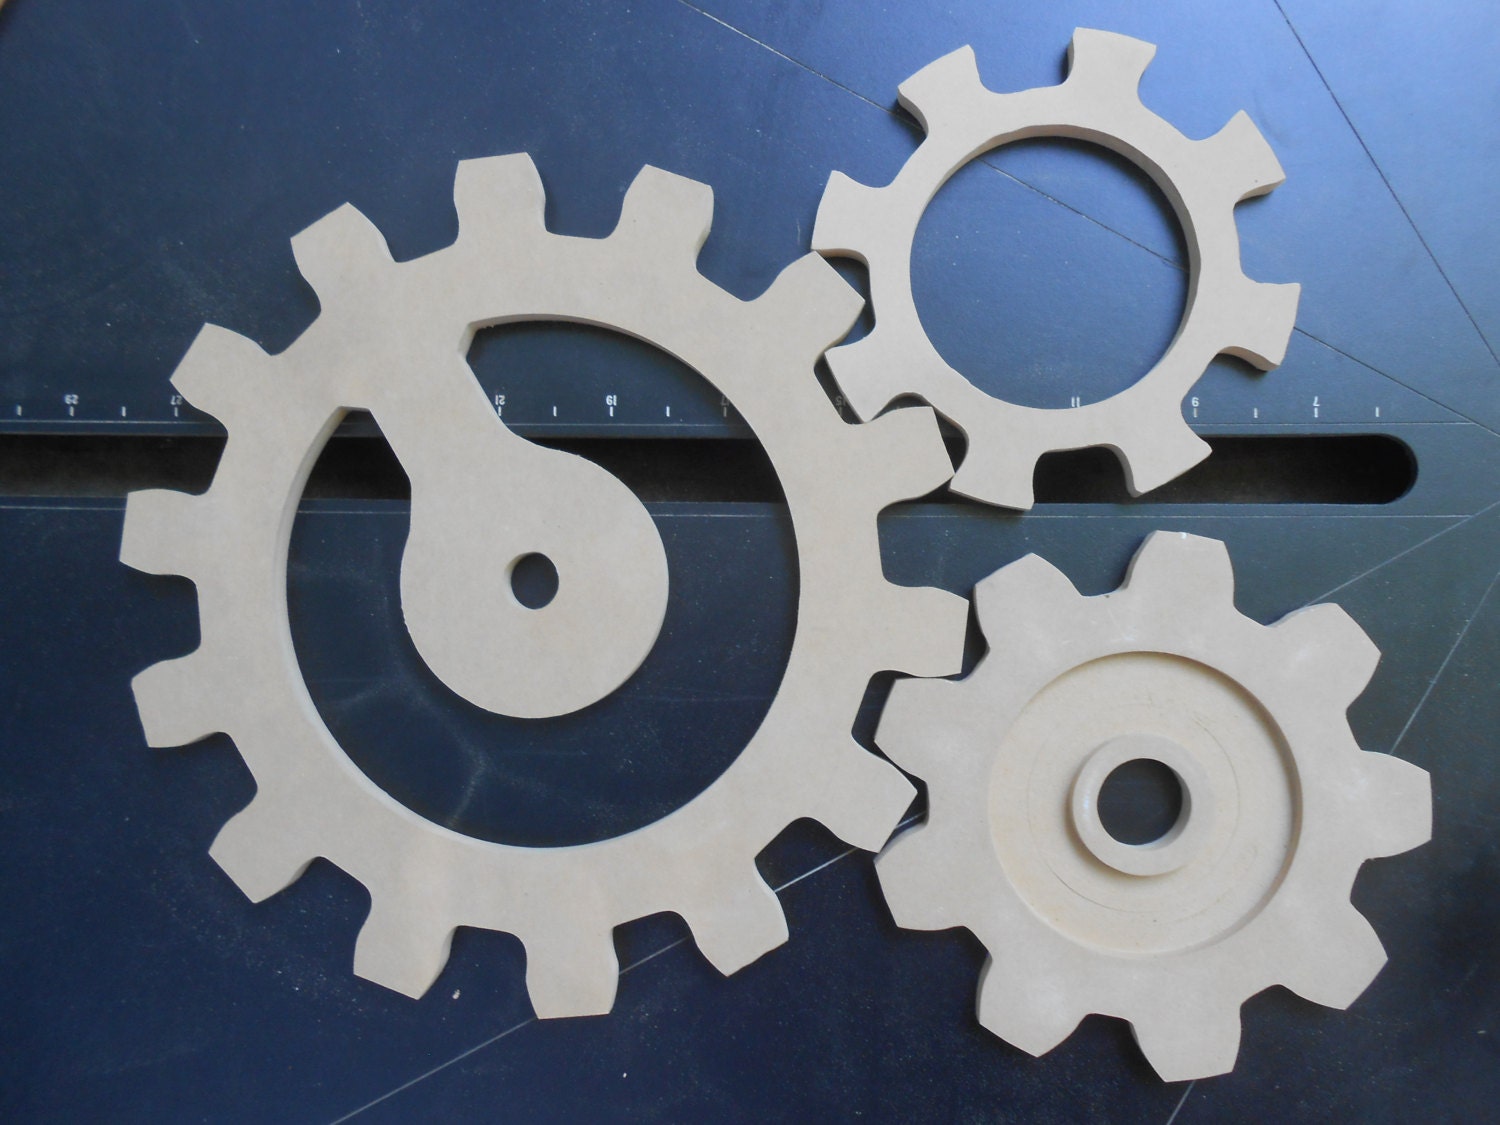 Cogs and Gears 3D Model - 3D CAD Browser